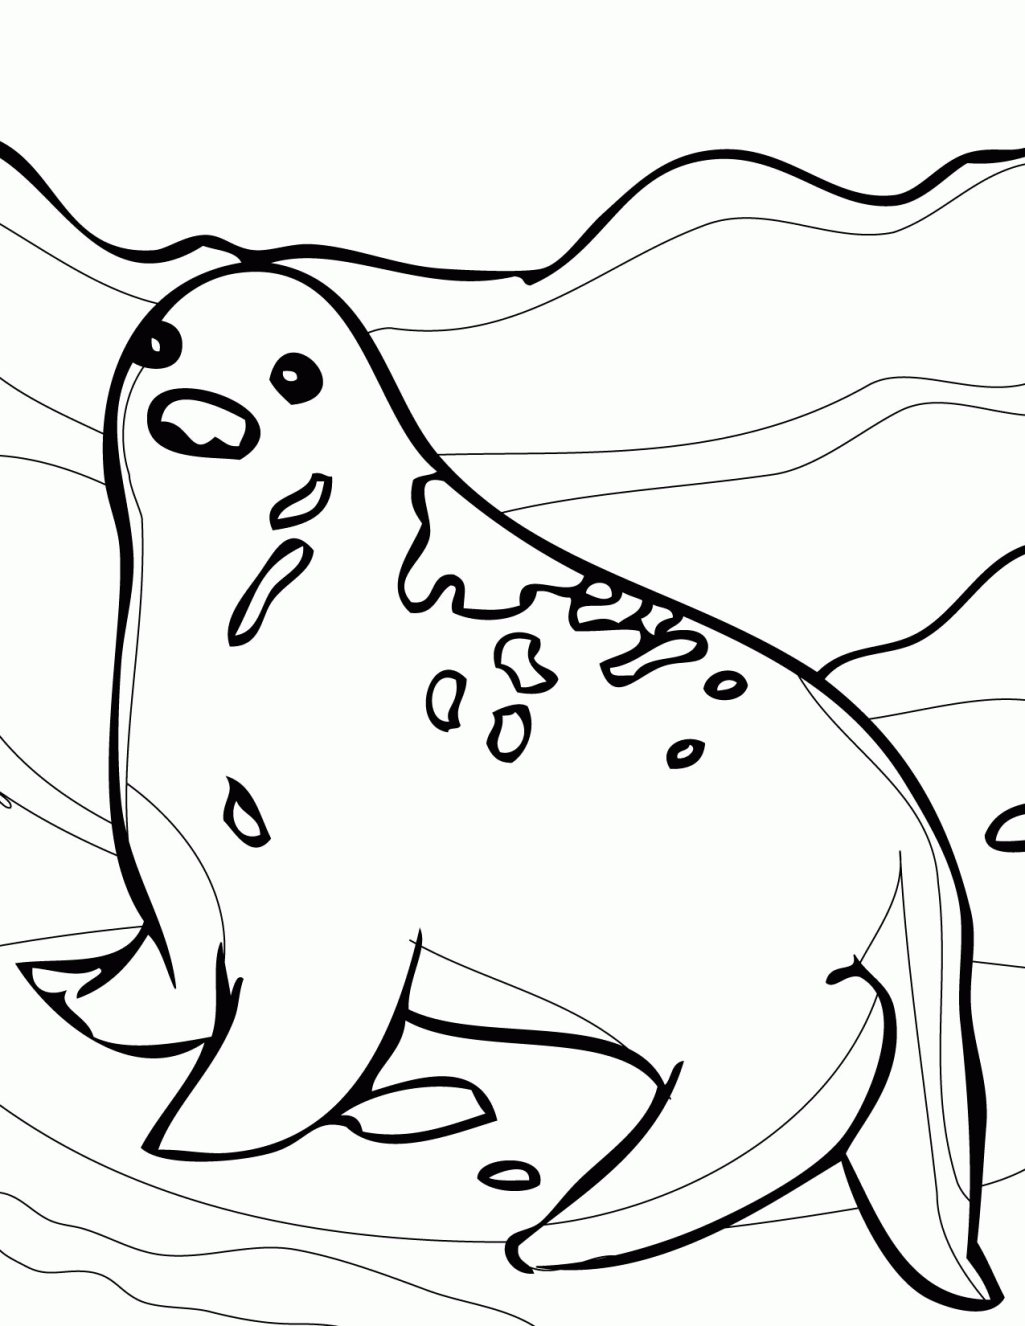 Arctic Animals Coloring Page Printable Arctic Animal Coloring Pages